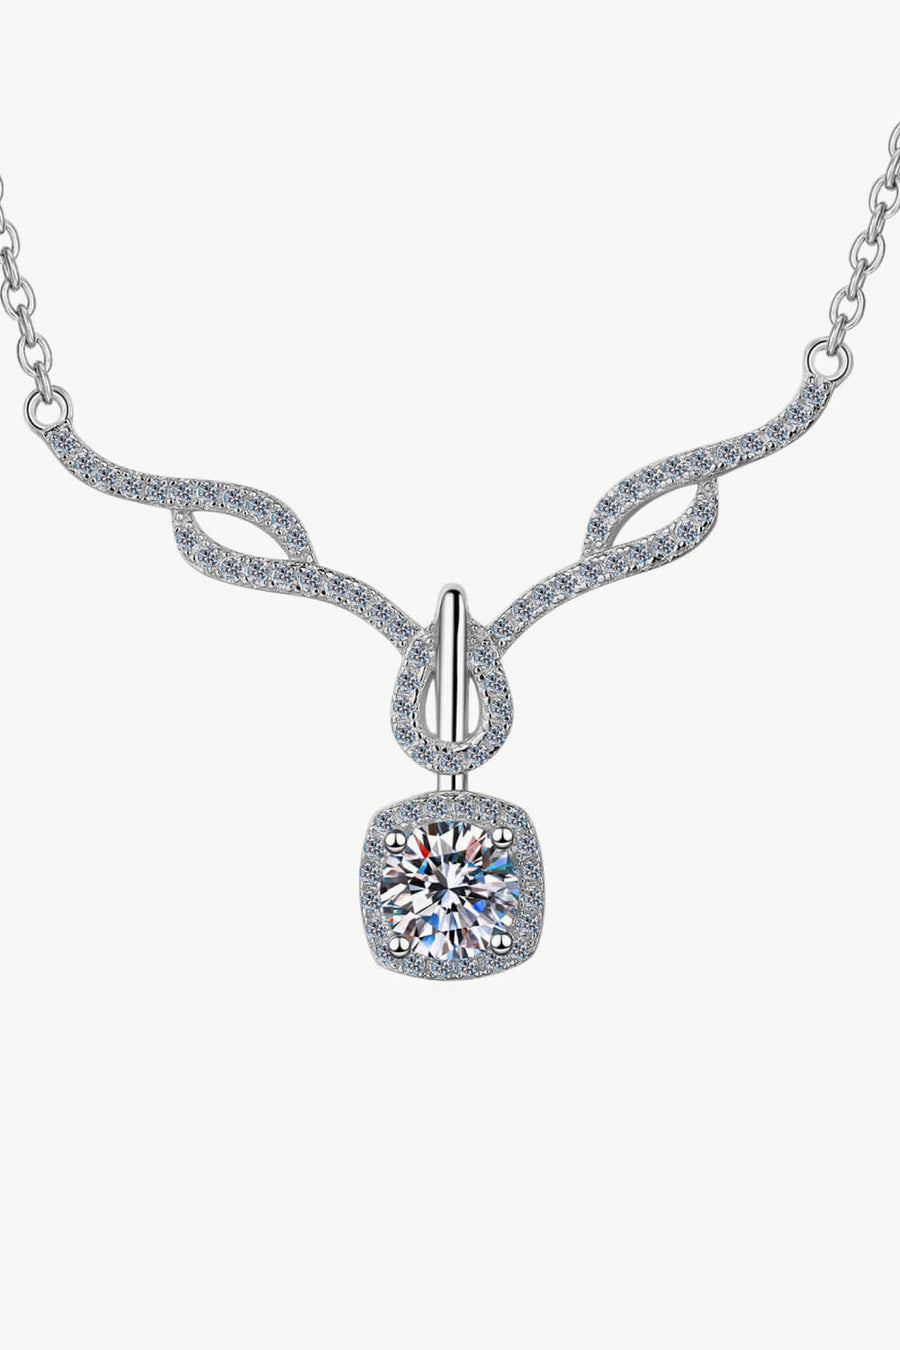 Best Diamond Necklace Jewelry Gifts for Women | 0.8 Carat Diamond Cushion Pendant Necklace - Right On Trend | MASON New York